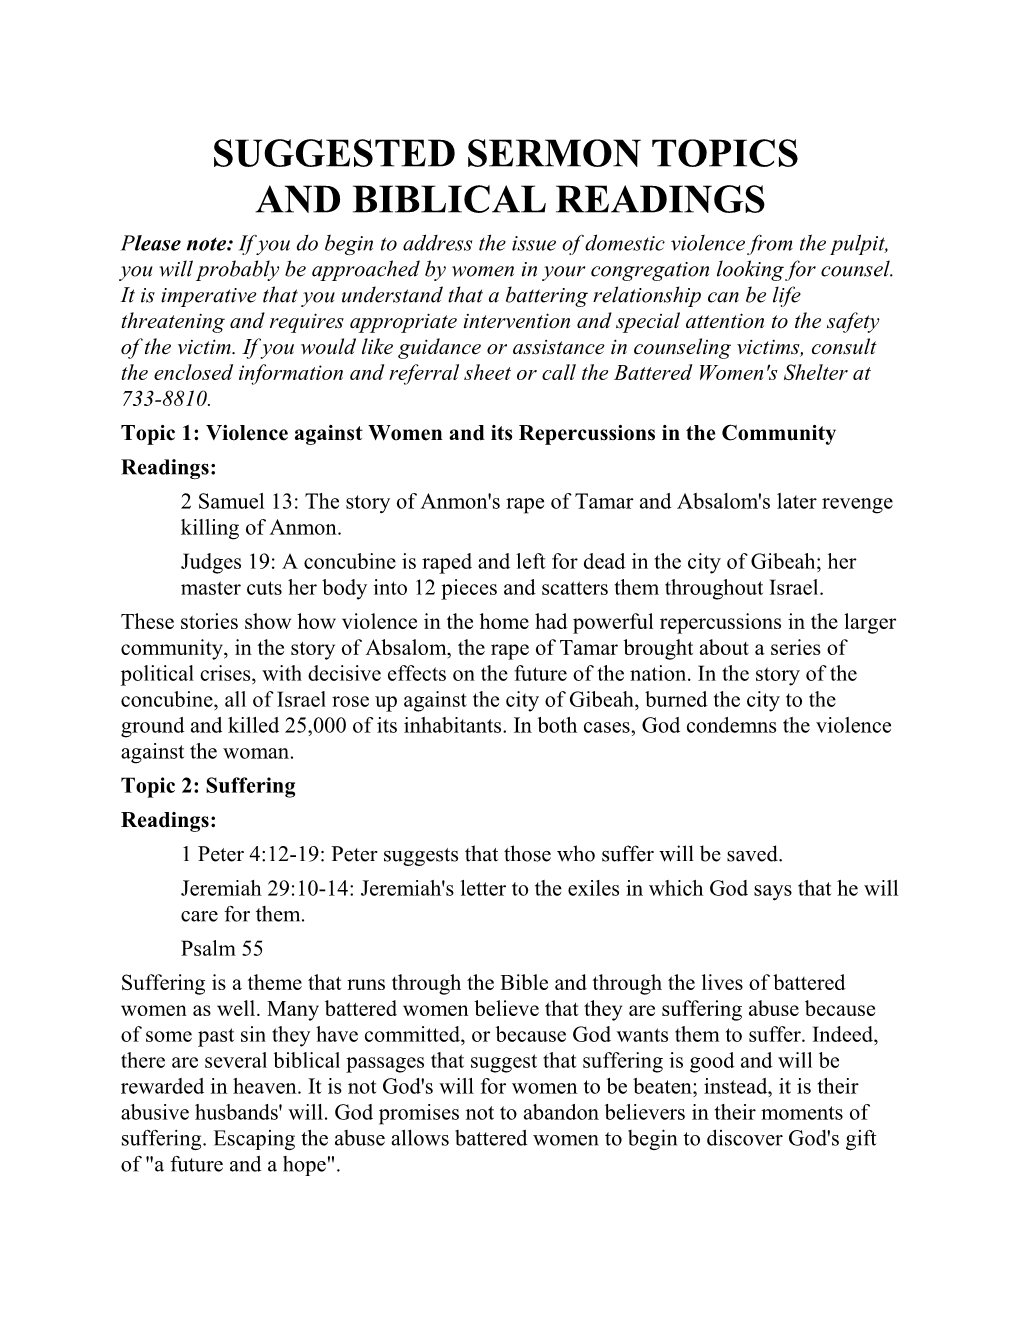 Suggested Sermon Topics and Biblical Readings